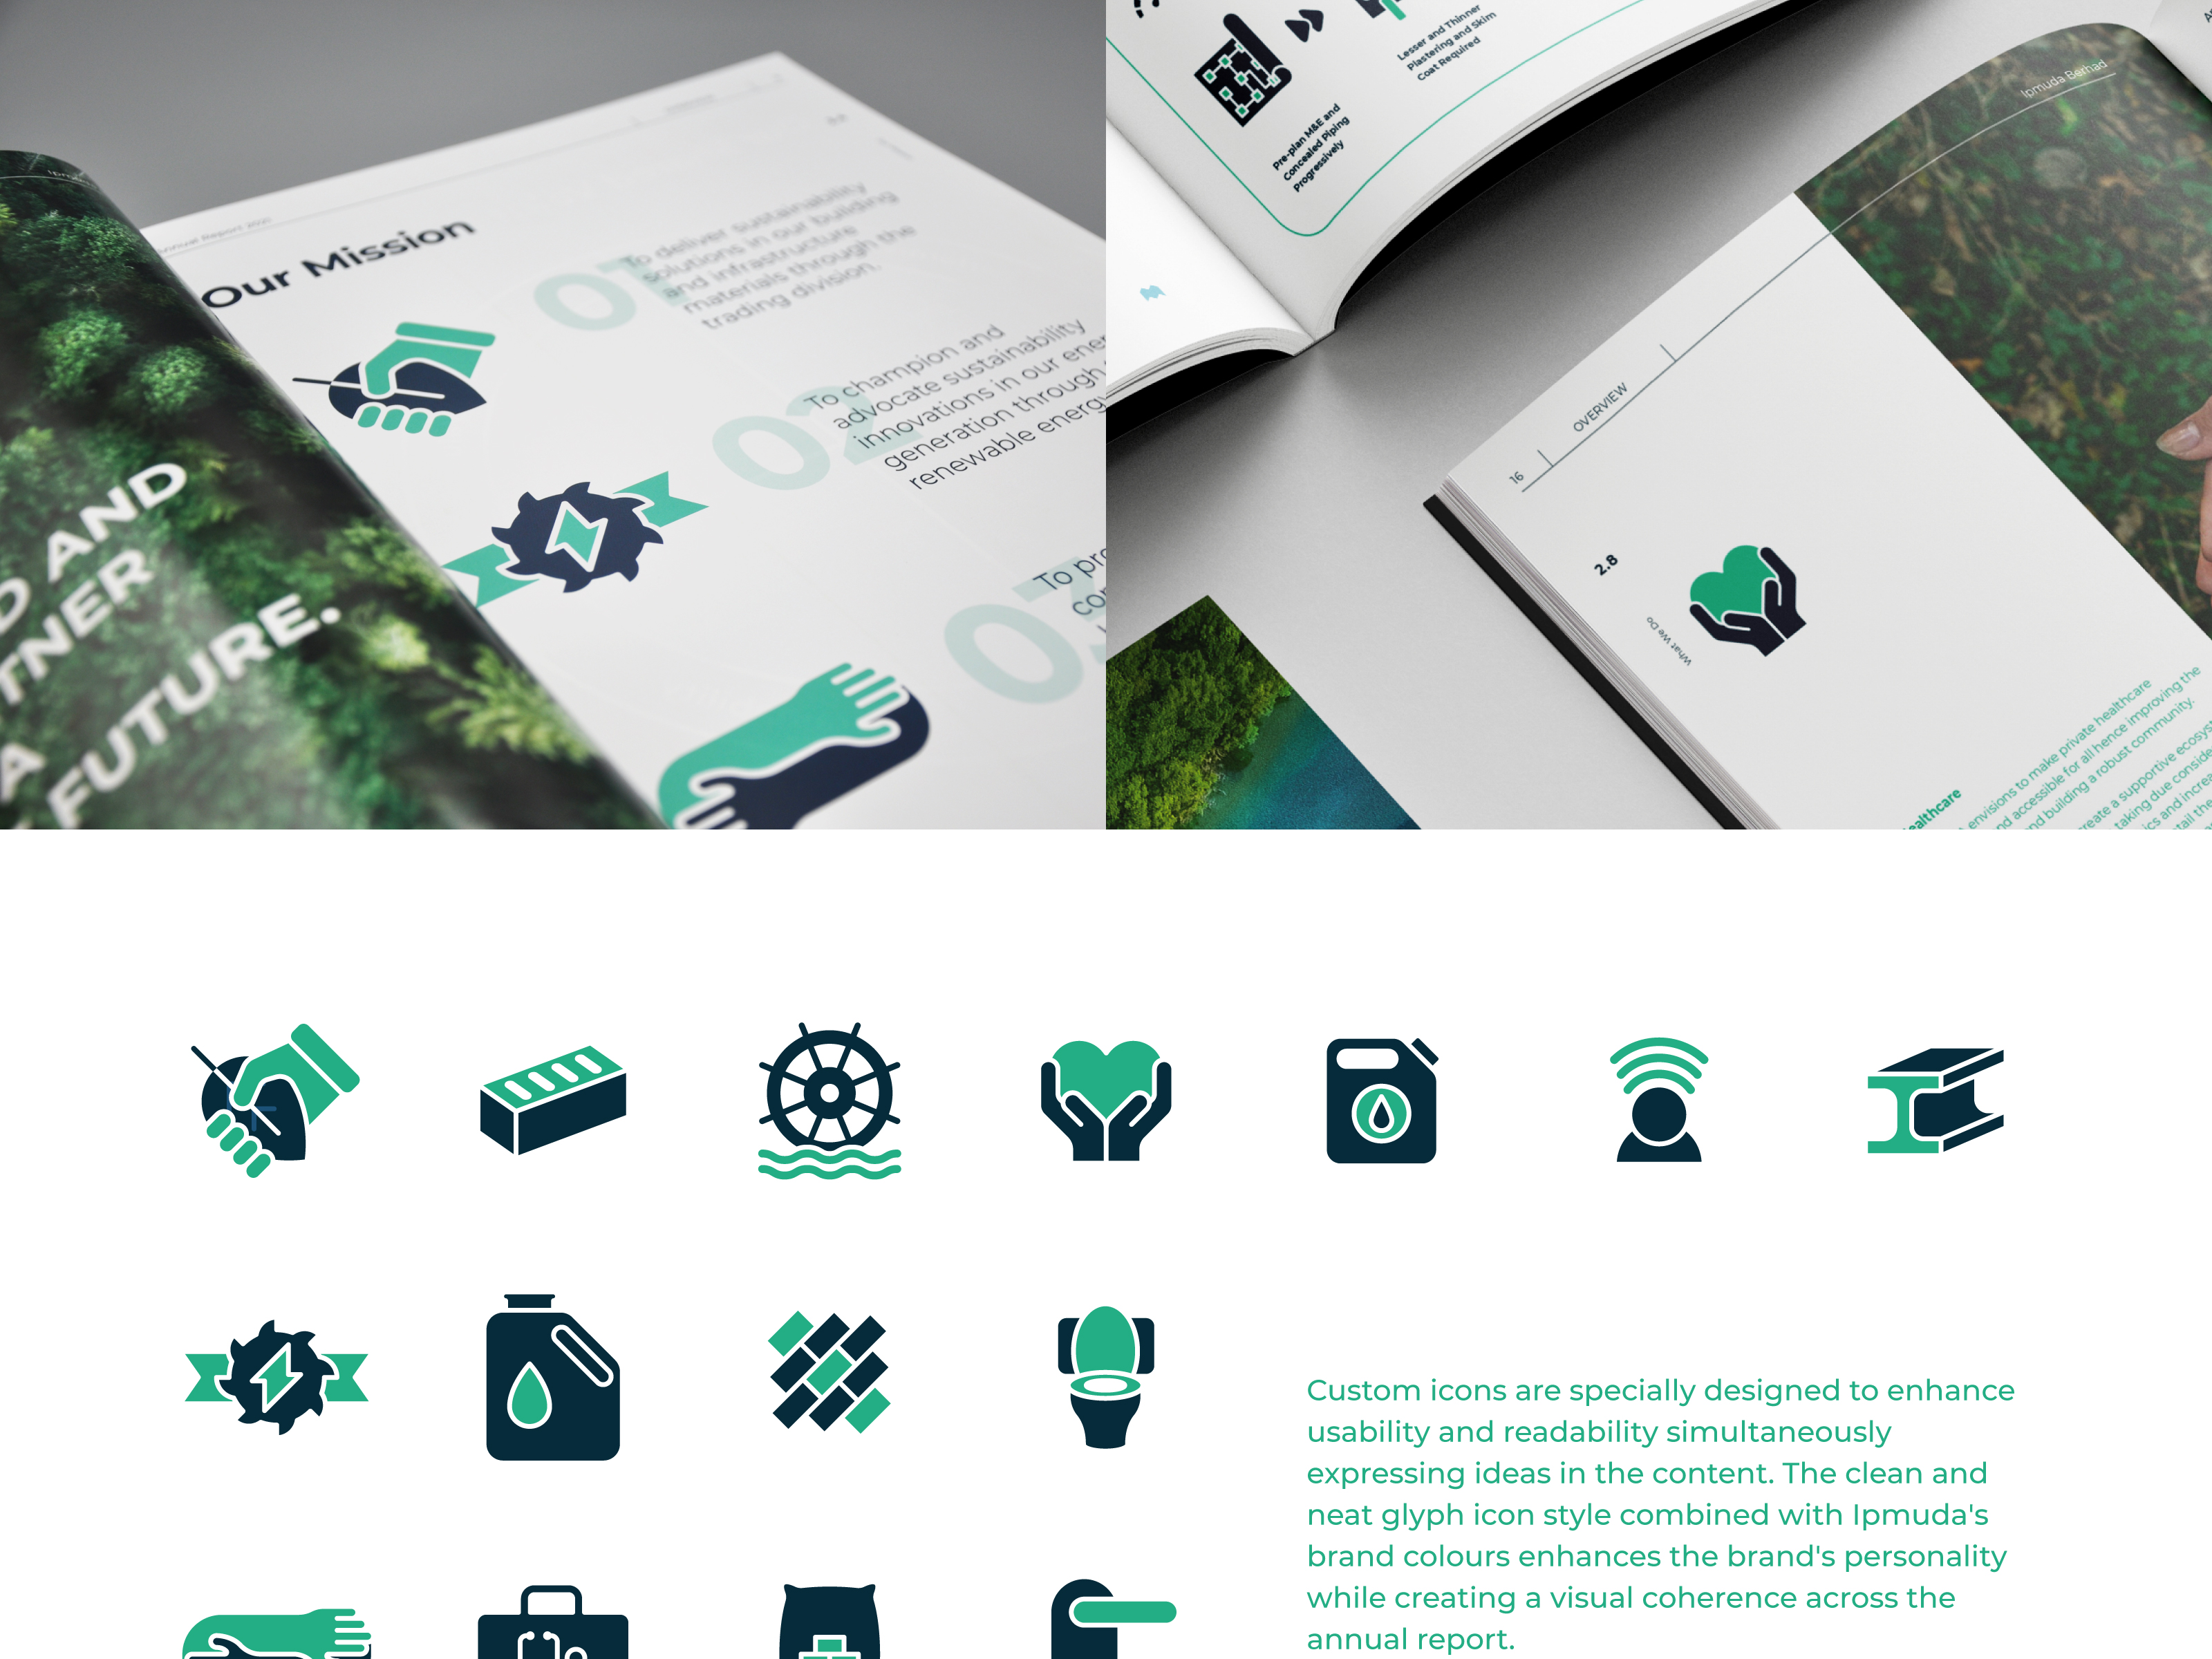 Ipmuda Berhad 2021 annual report art direction with icons design to assist in information organization and quick visual cues